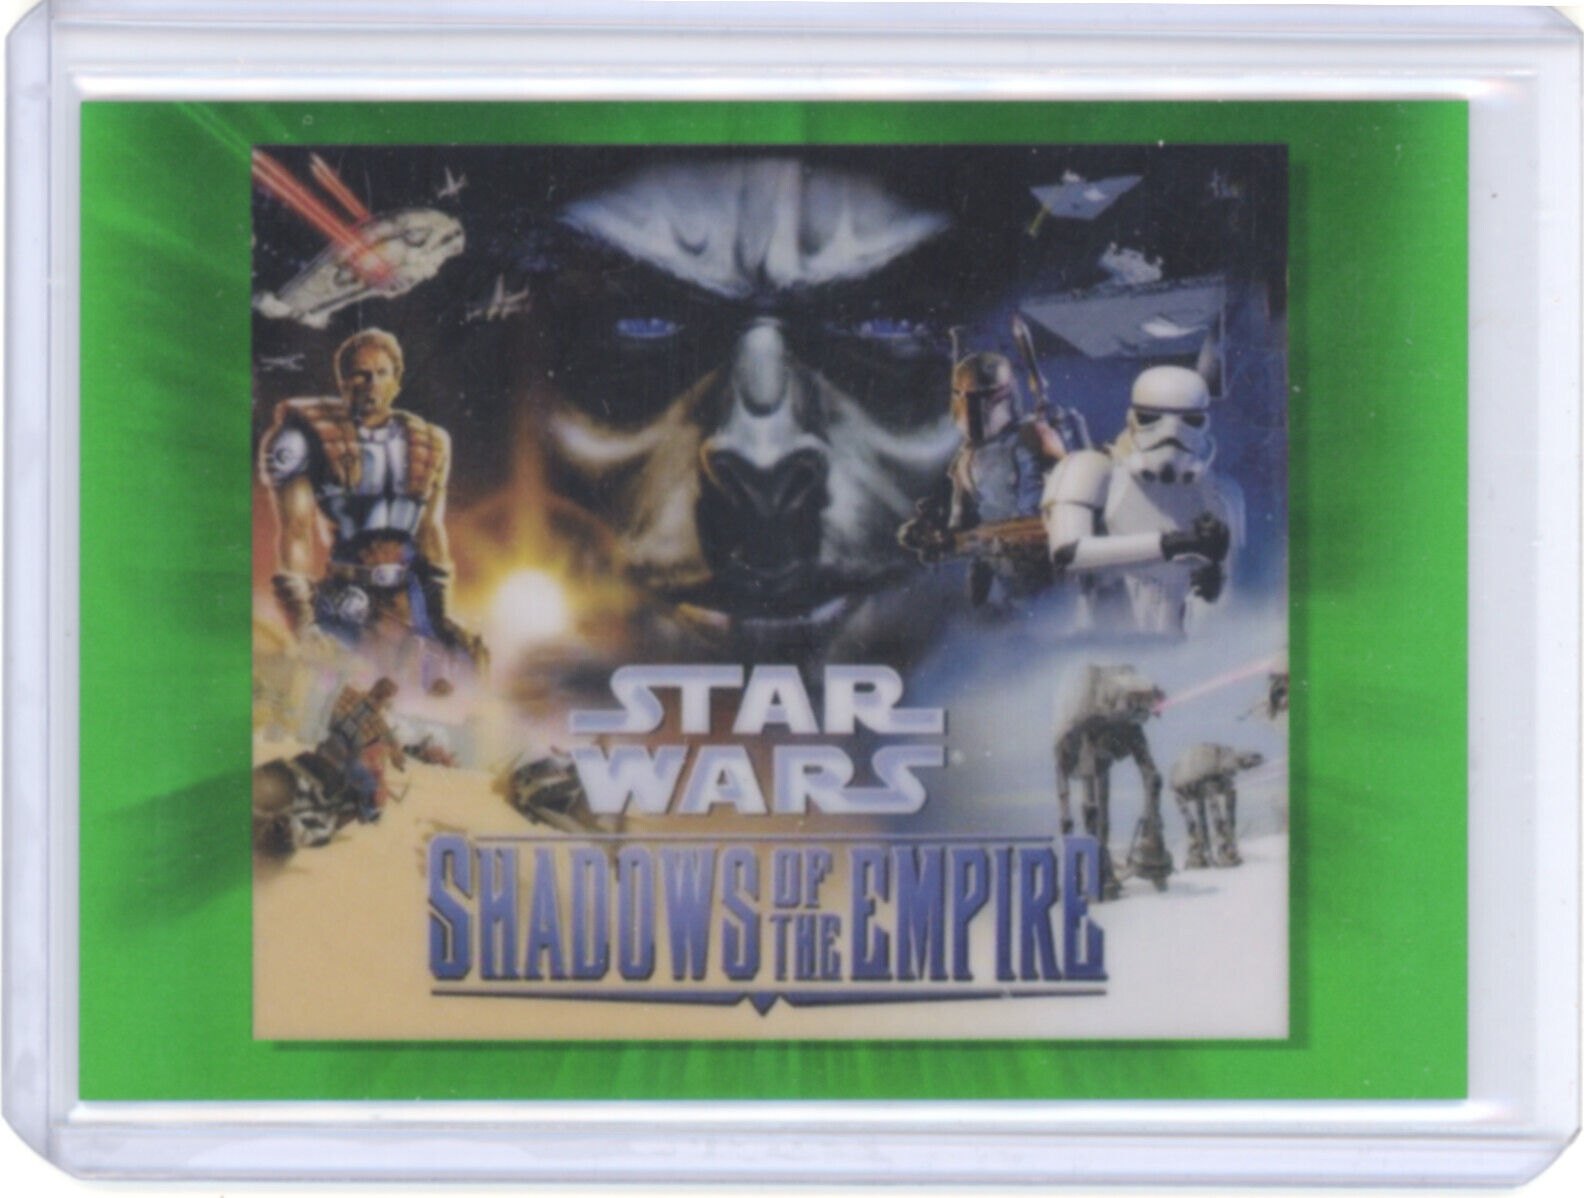 2022 Topps Chrome Star Wars Galaxy - Green Shadows of the Empire /99